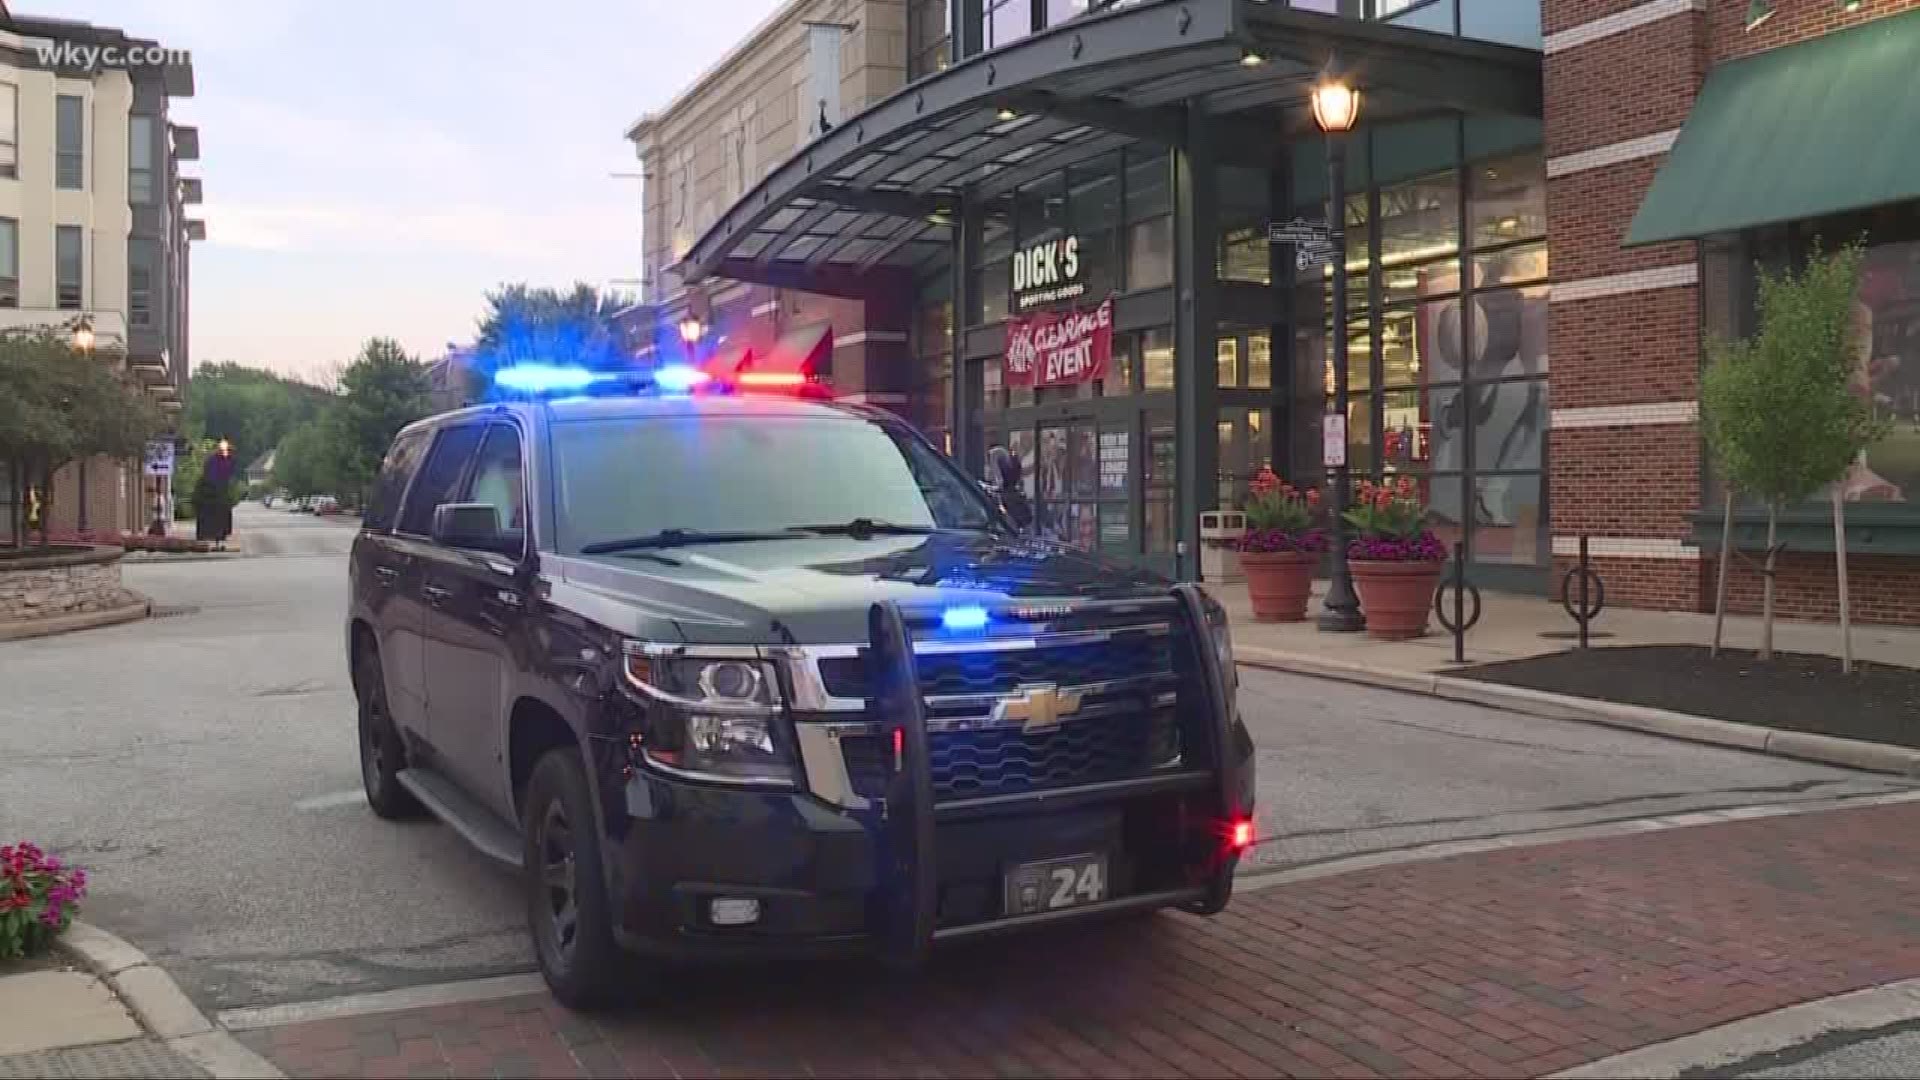 A 27-year-old Cleveland man is in custody on Friday night after an attempted robbery turned into a foot pursuit at Crocker Park in Westlake.